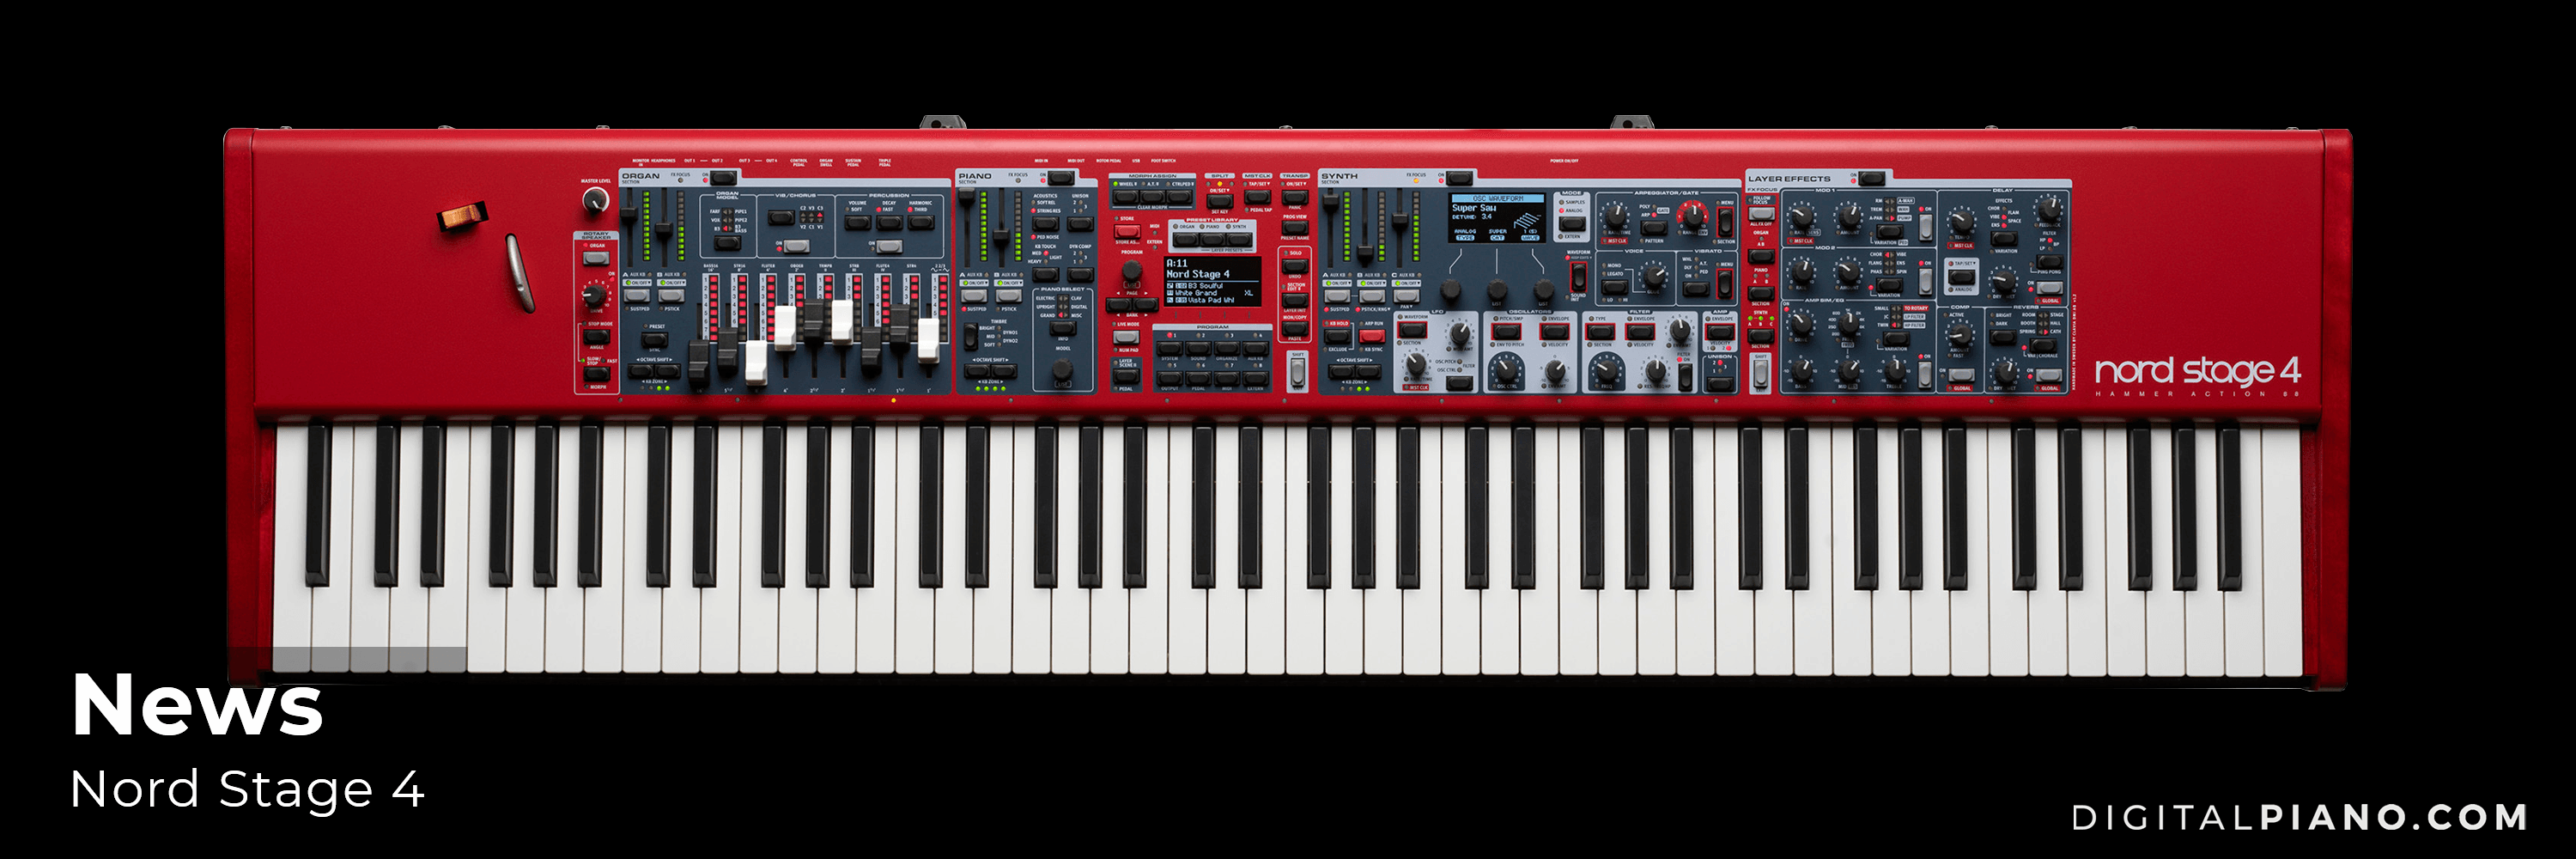 News - Nord Stage 4